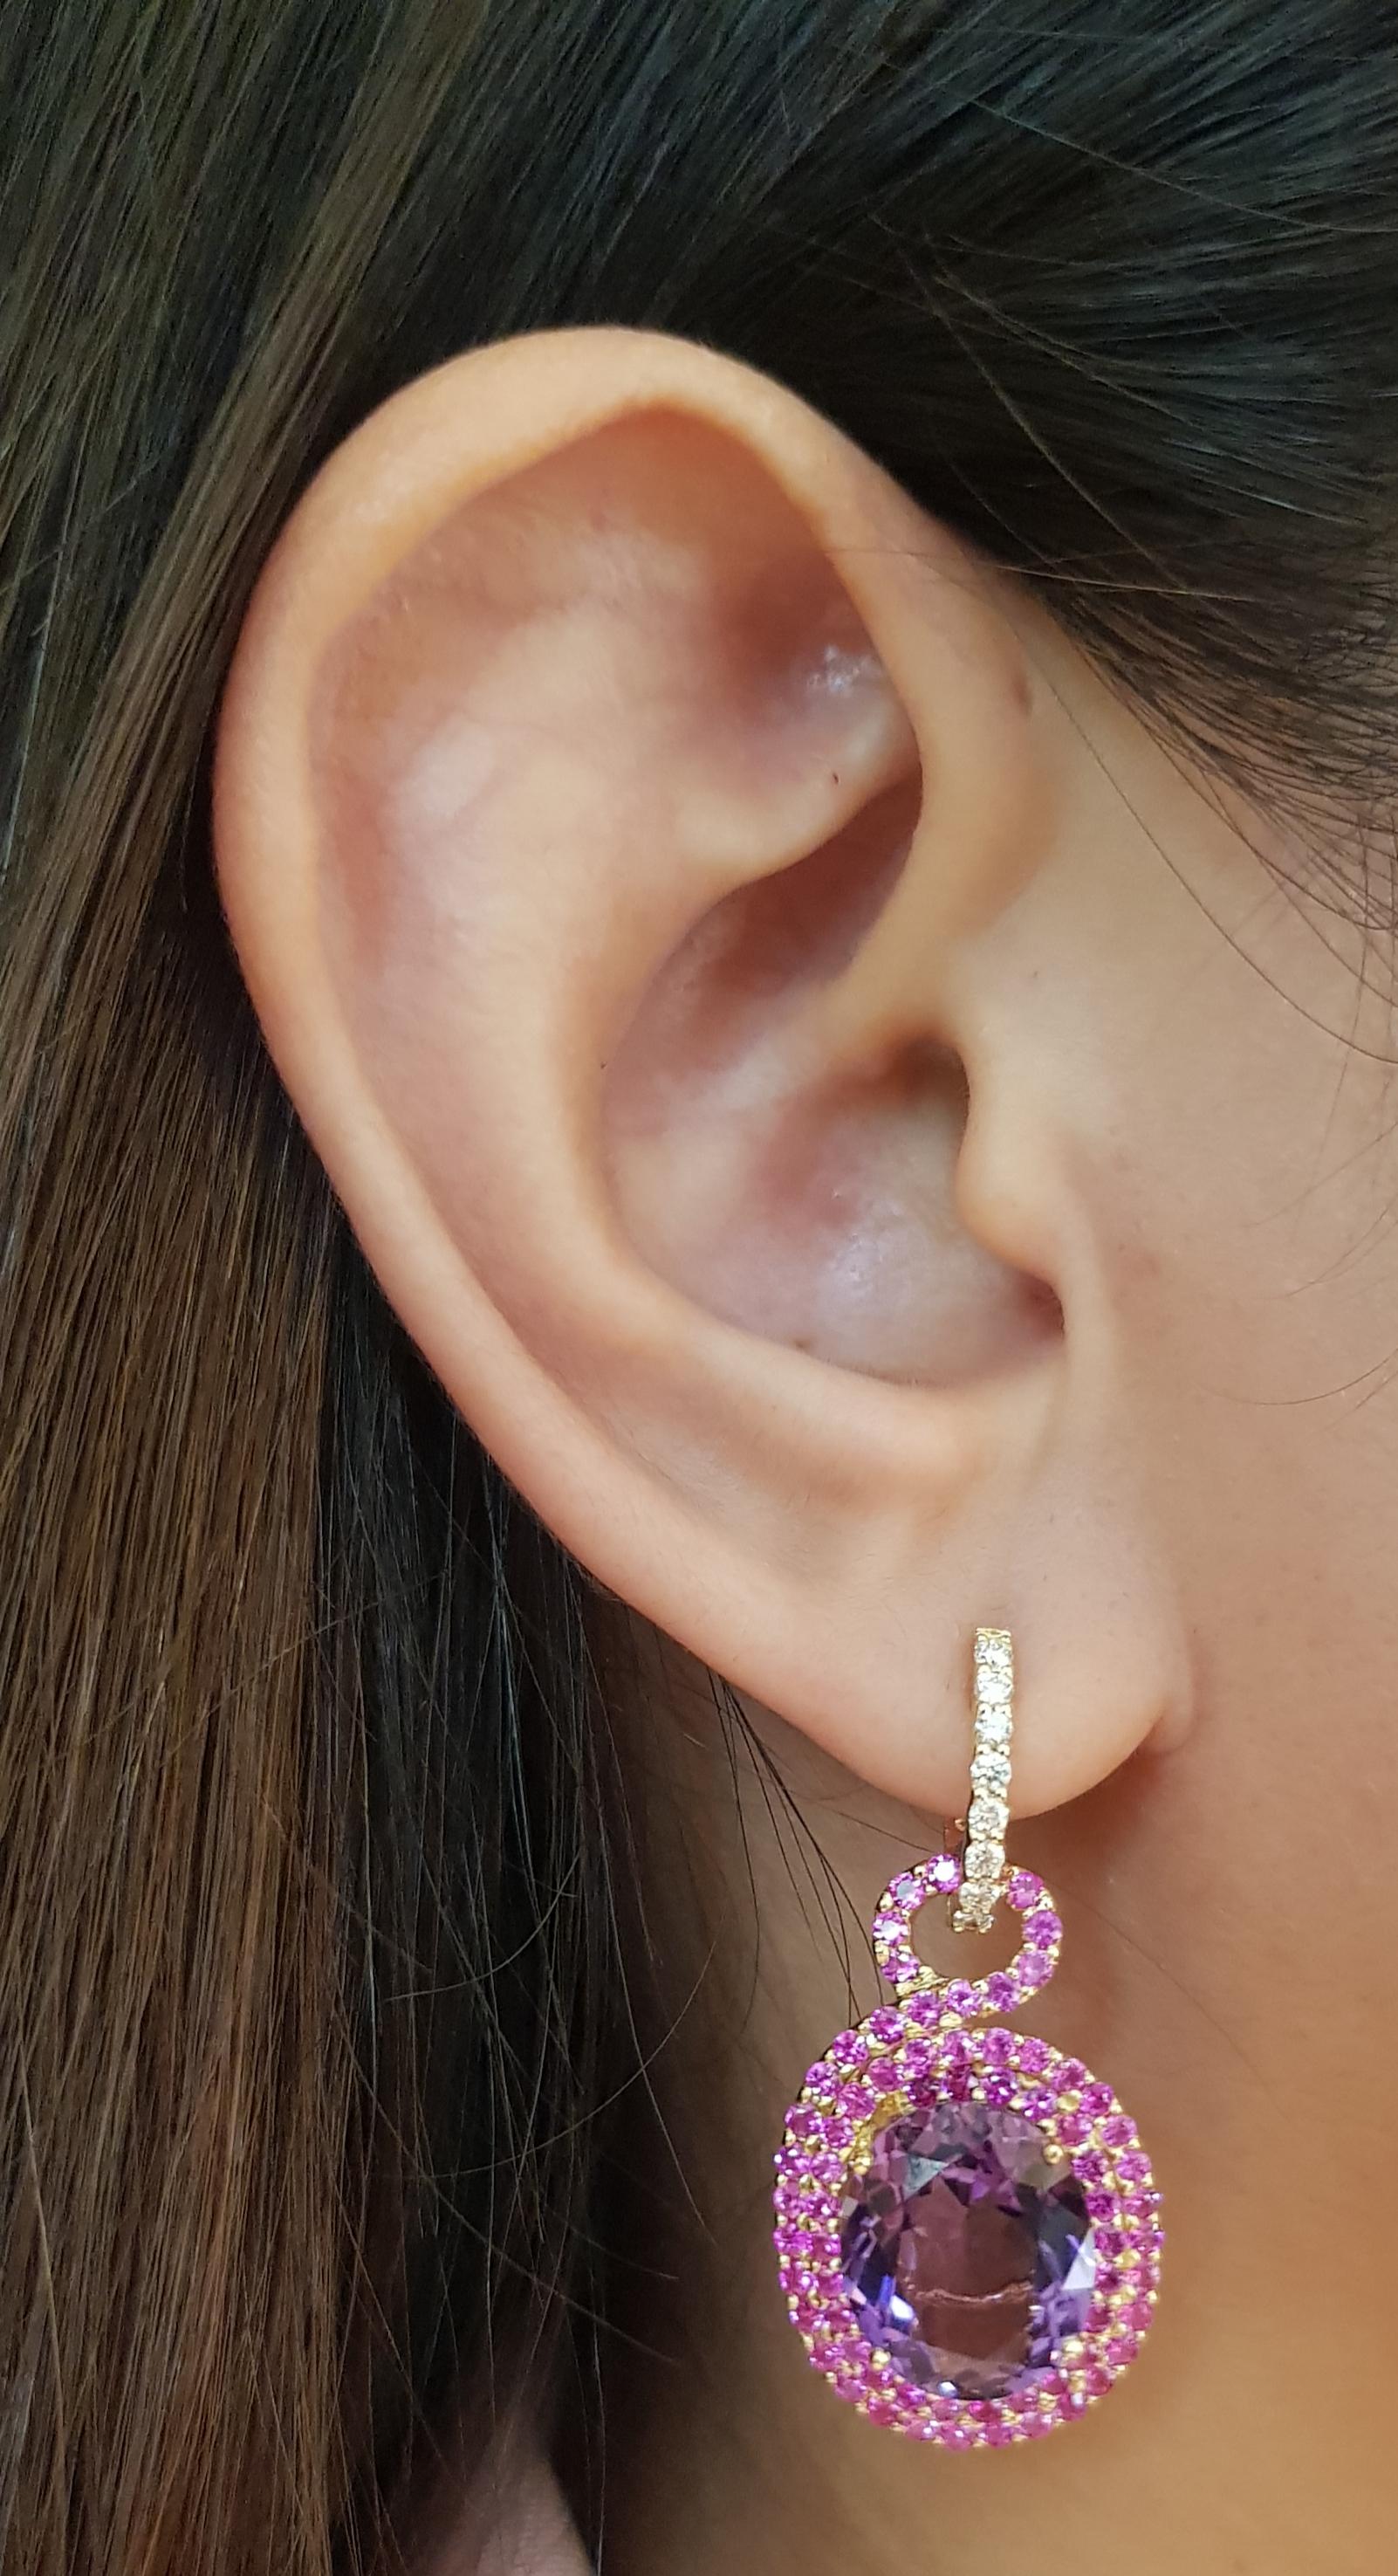 Amethyst 10.39 carats, Pink Sapphire 2.52 carats and Diamond 0.28 carat Earrings set In 18 Karat Gold Settings

Width:   1.7 cm 
Length:  3.8 cm
Total Weight: 11.56 grams

